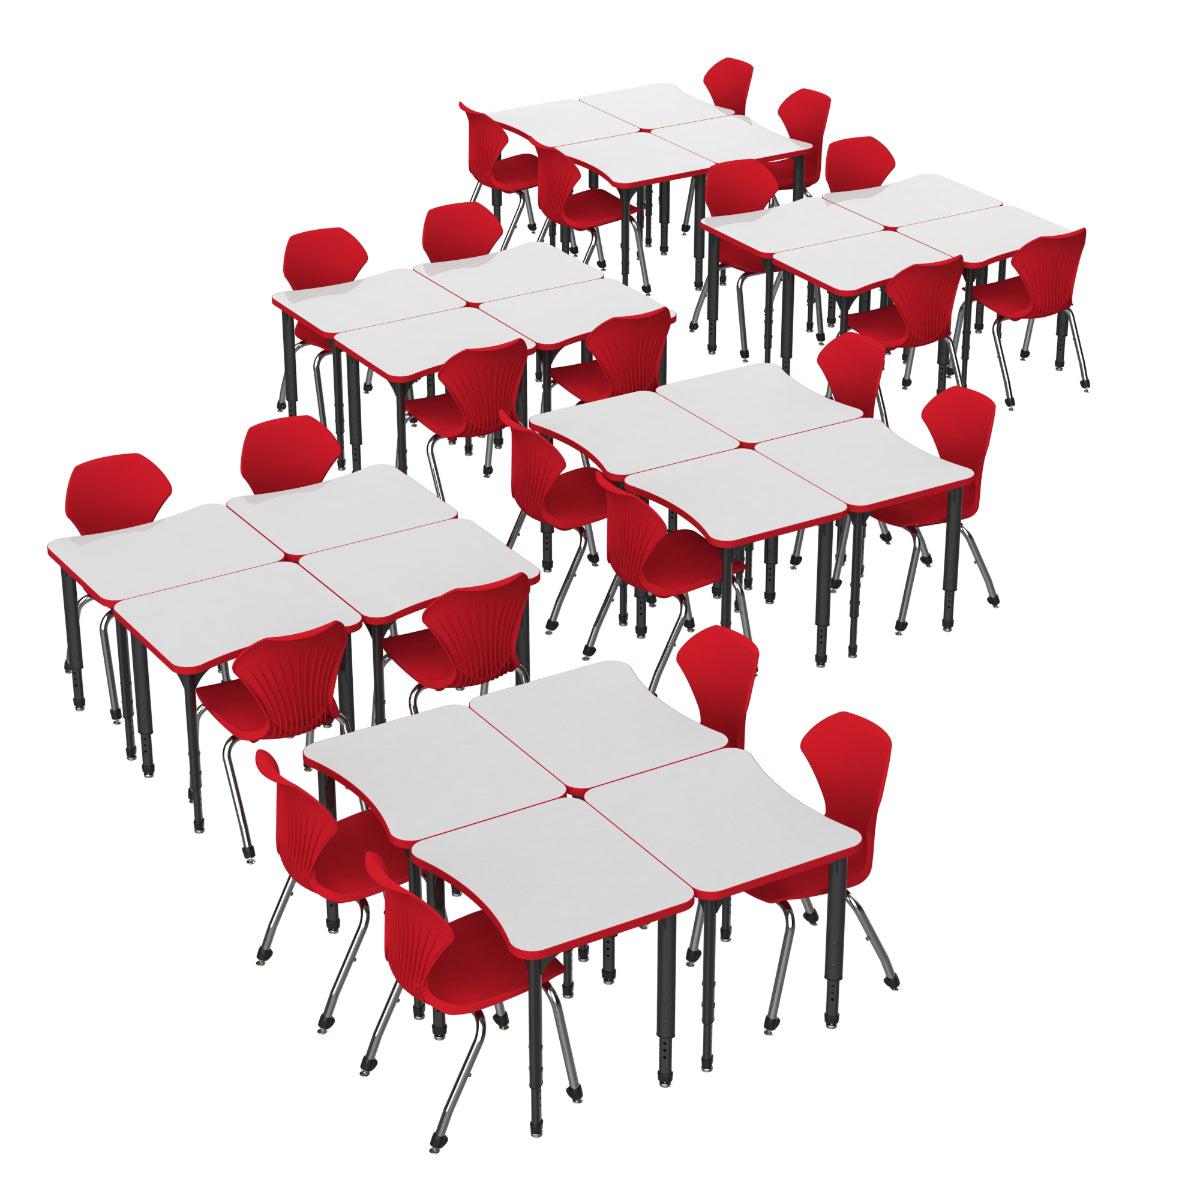 Apex Dry Erase Classroom Desk and Chair Package, 24 Curved Collaborative Student Desks with 24 Apex Stack Chairs